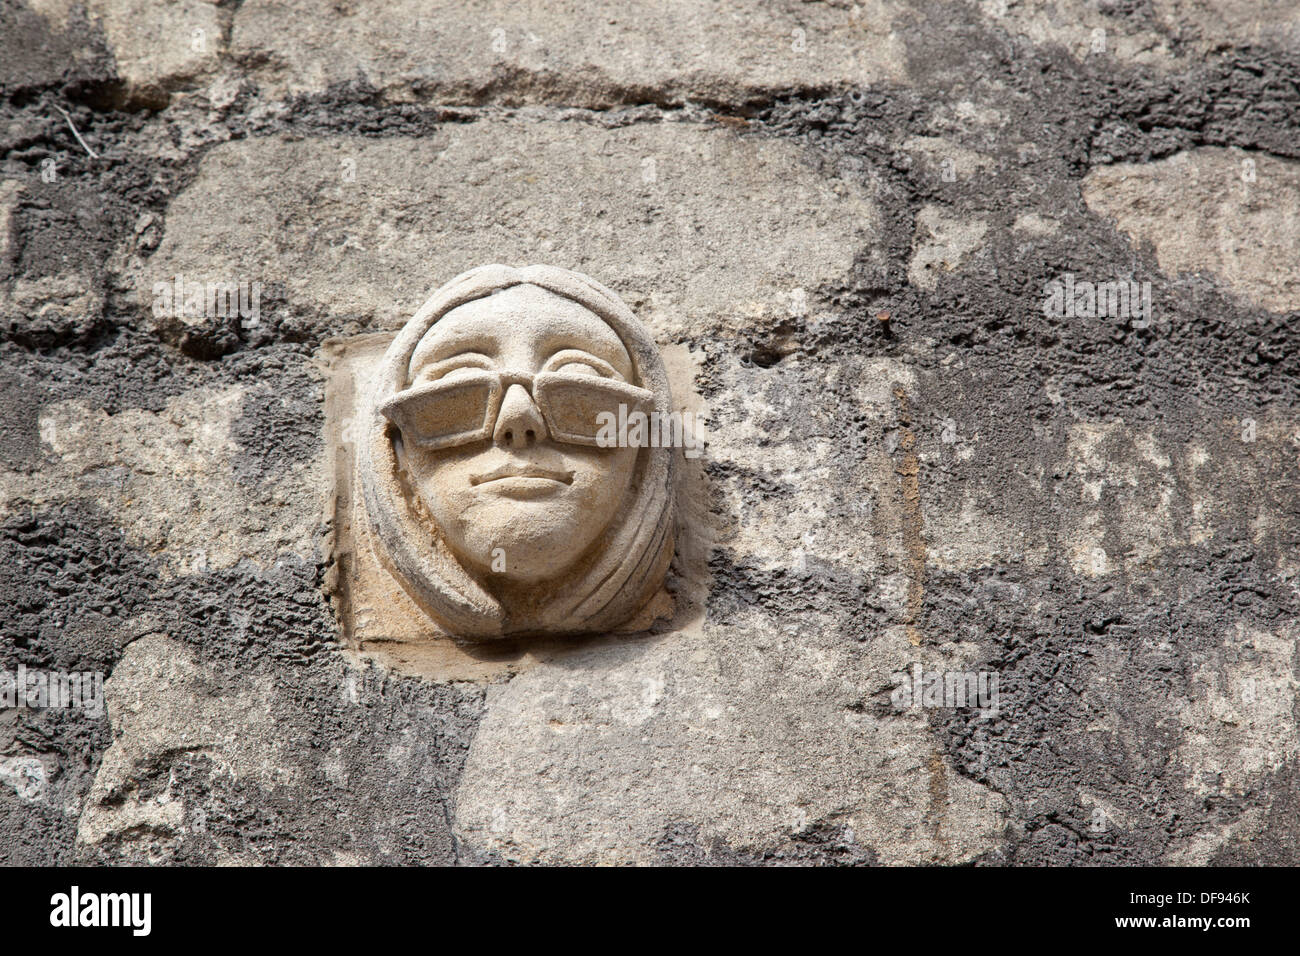 A stone face from The Great Wall of Walcot project, Walcot Street, Bath, England Stock Photo